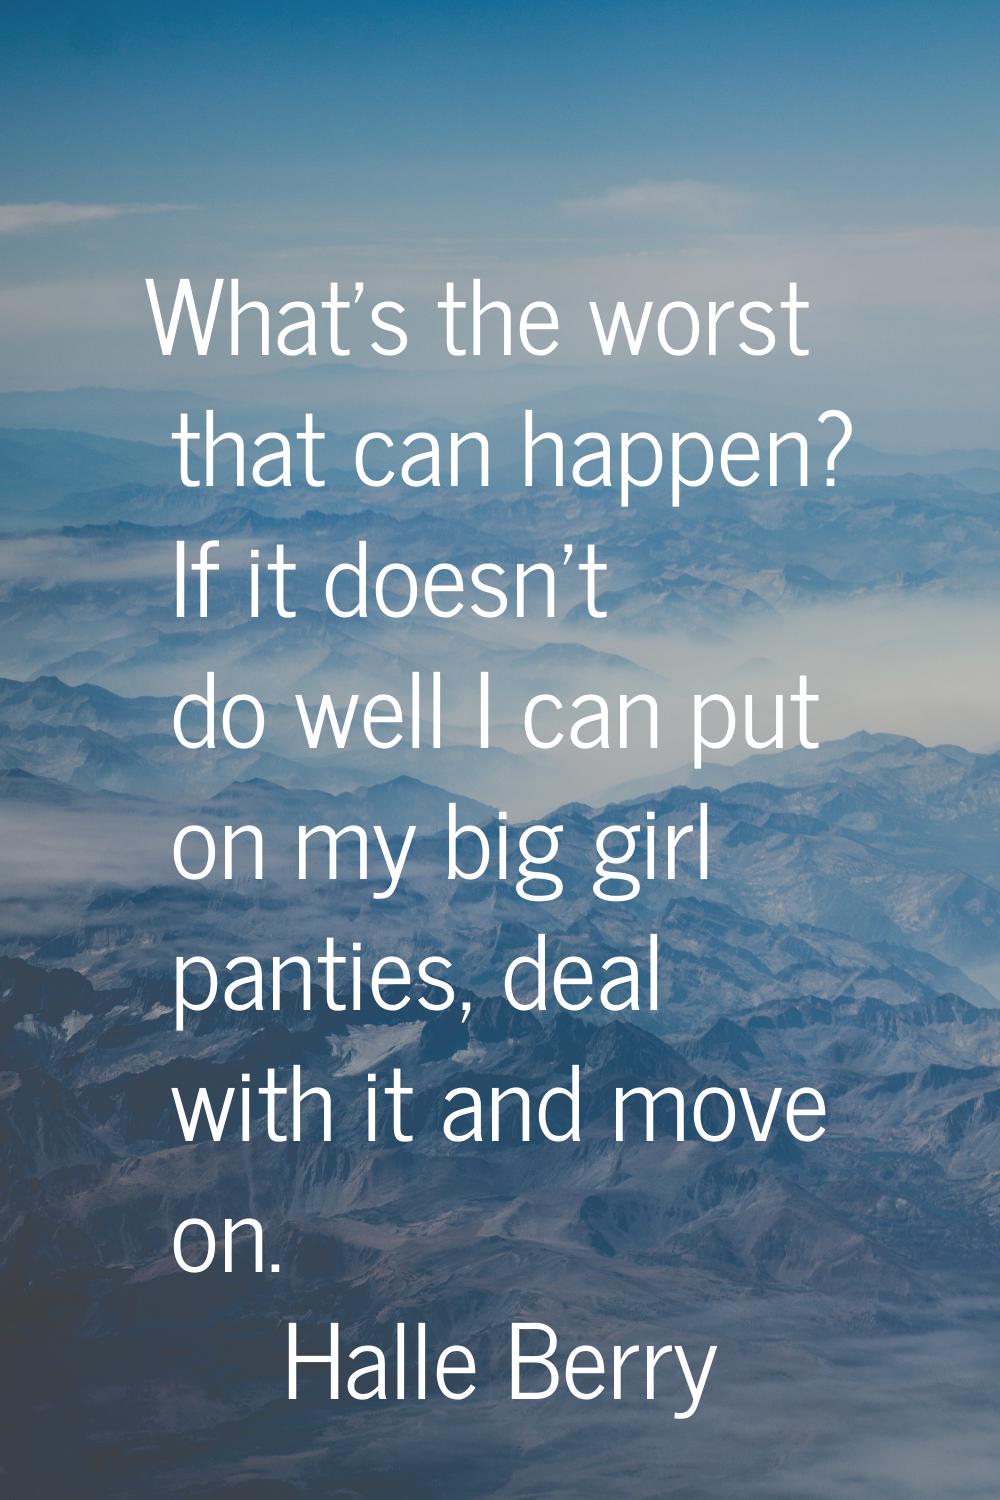 What's the worst that can happen? If it doesn't do well I can put on my big girl panties, deal with